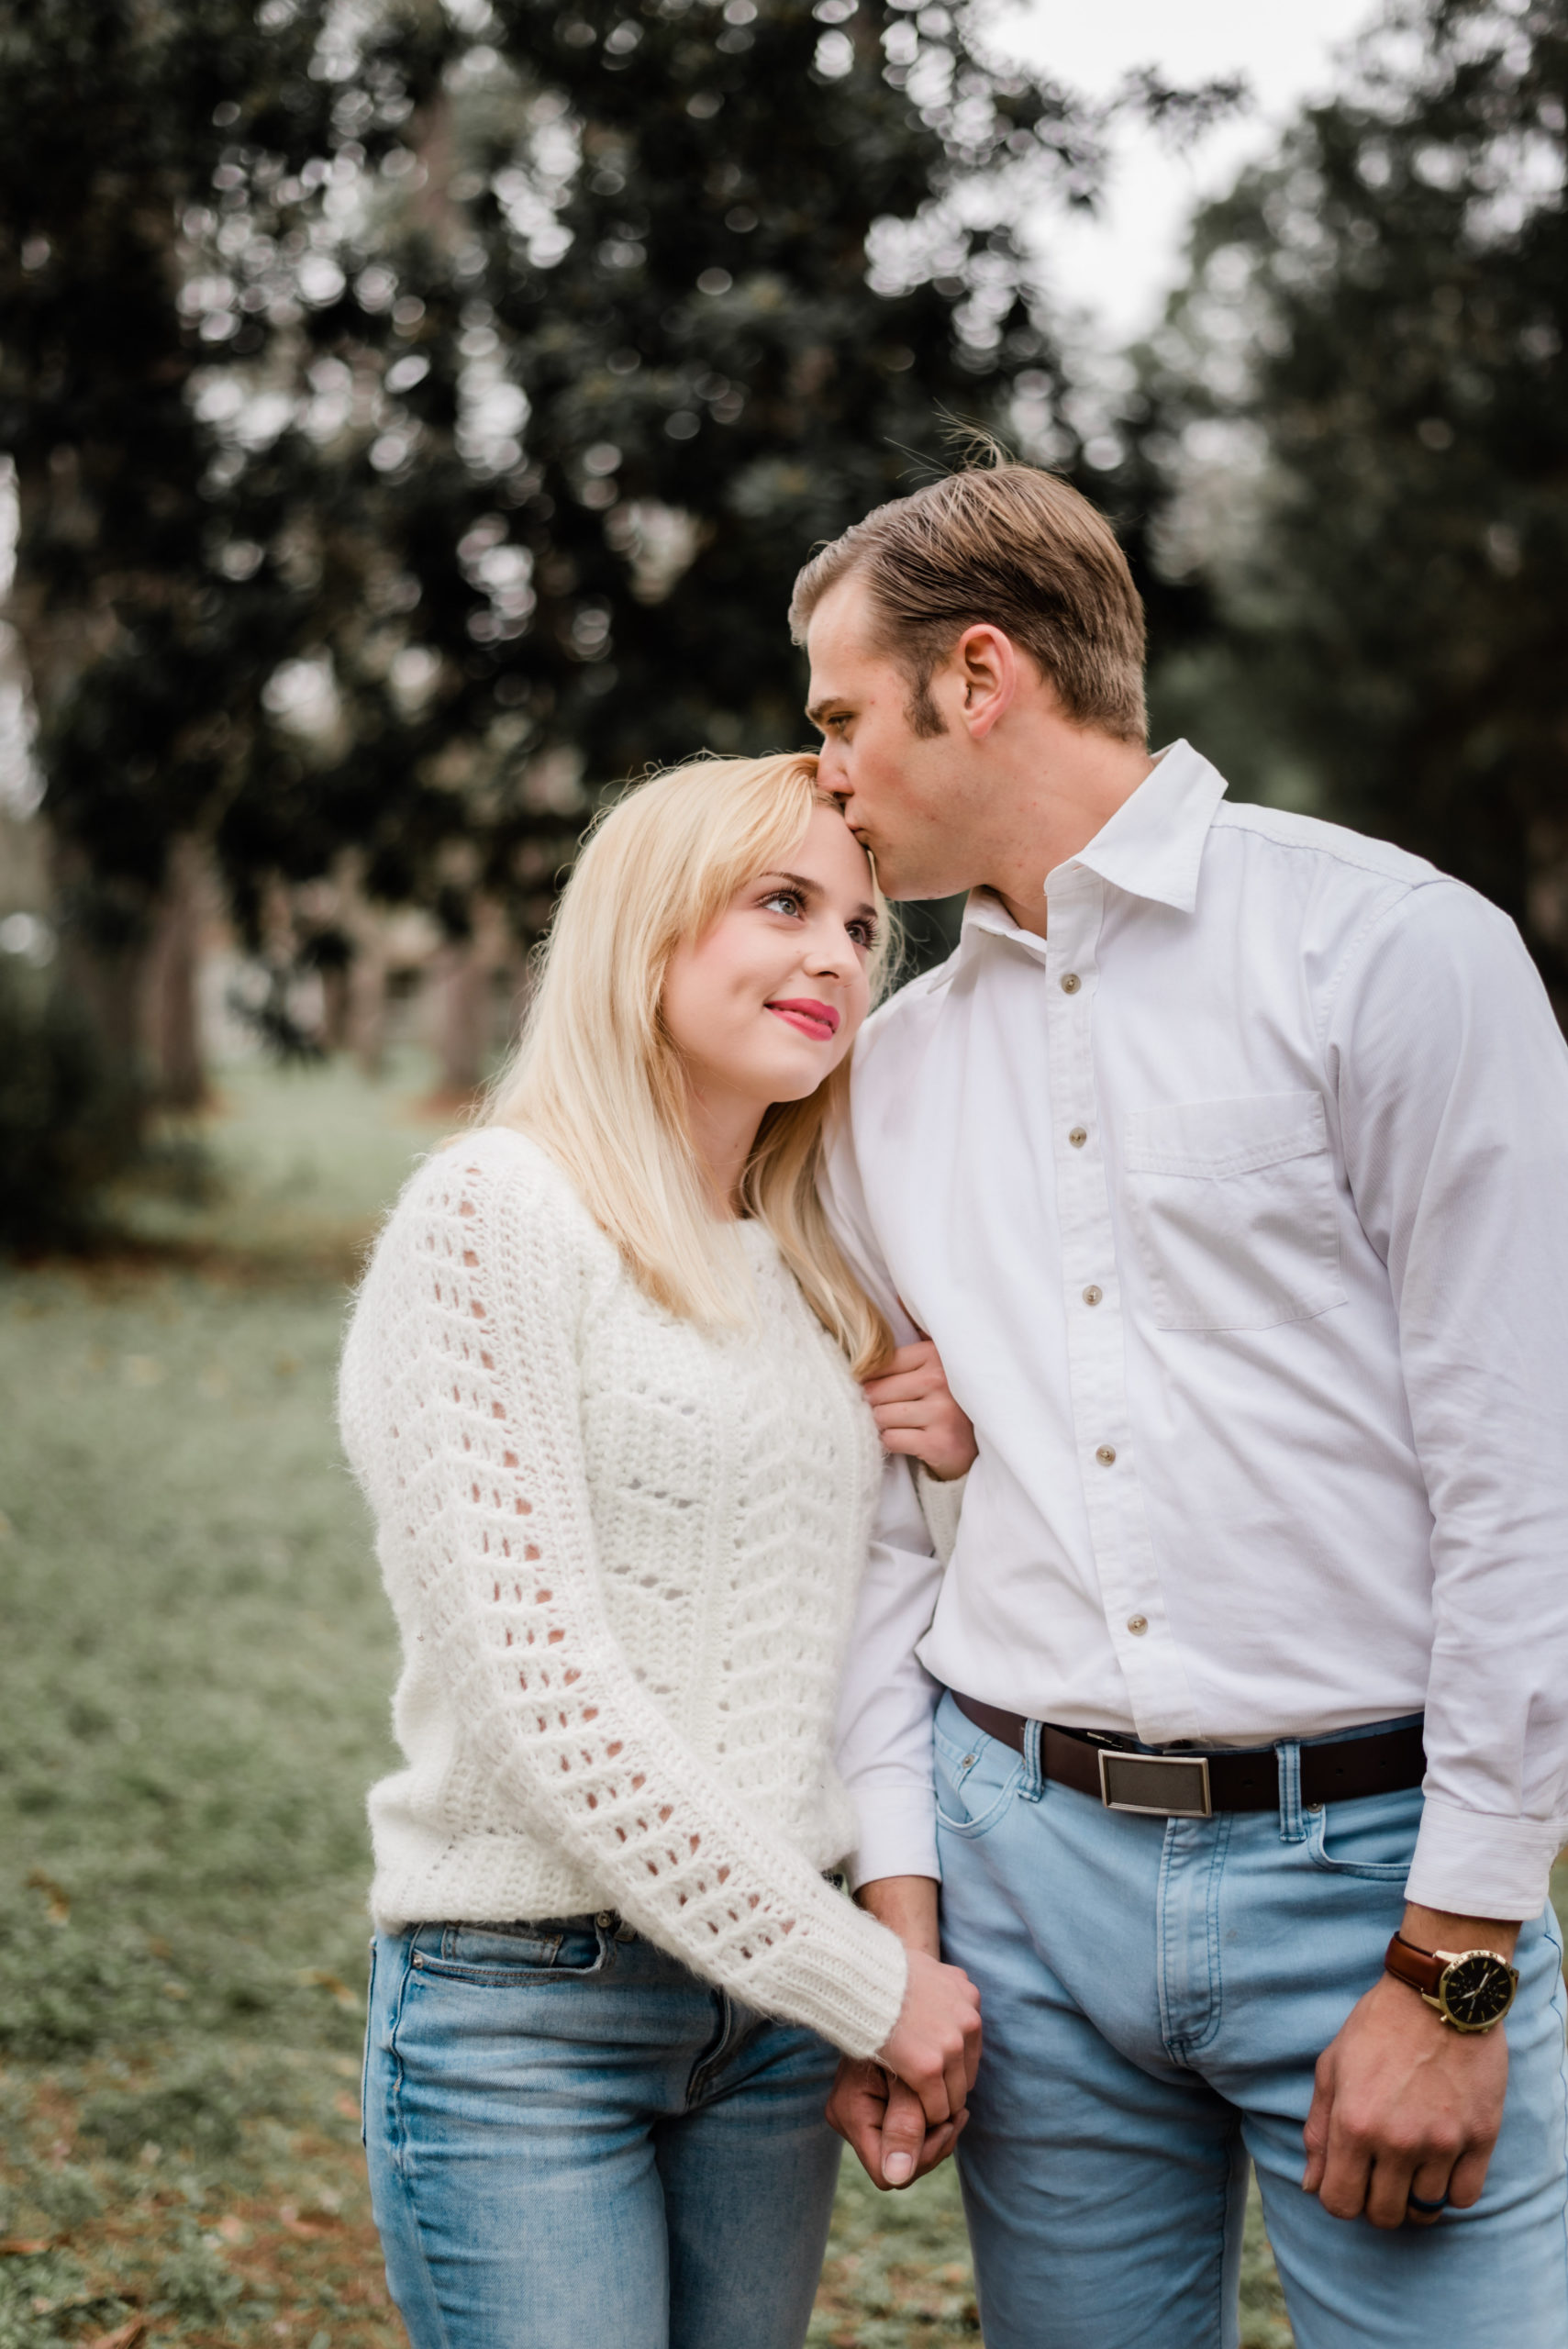 modern engagement photos at heritage park and gardens in live oak Florida by Black tie and co